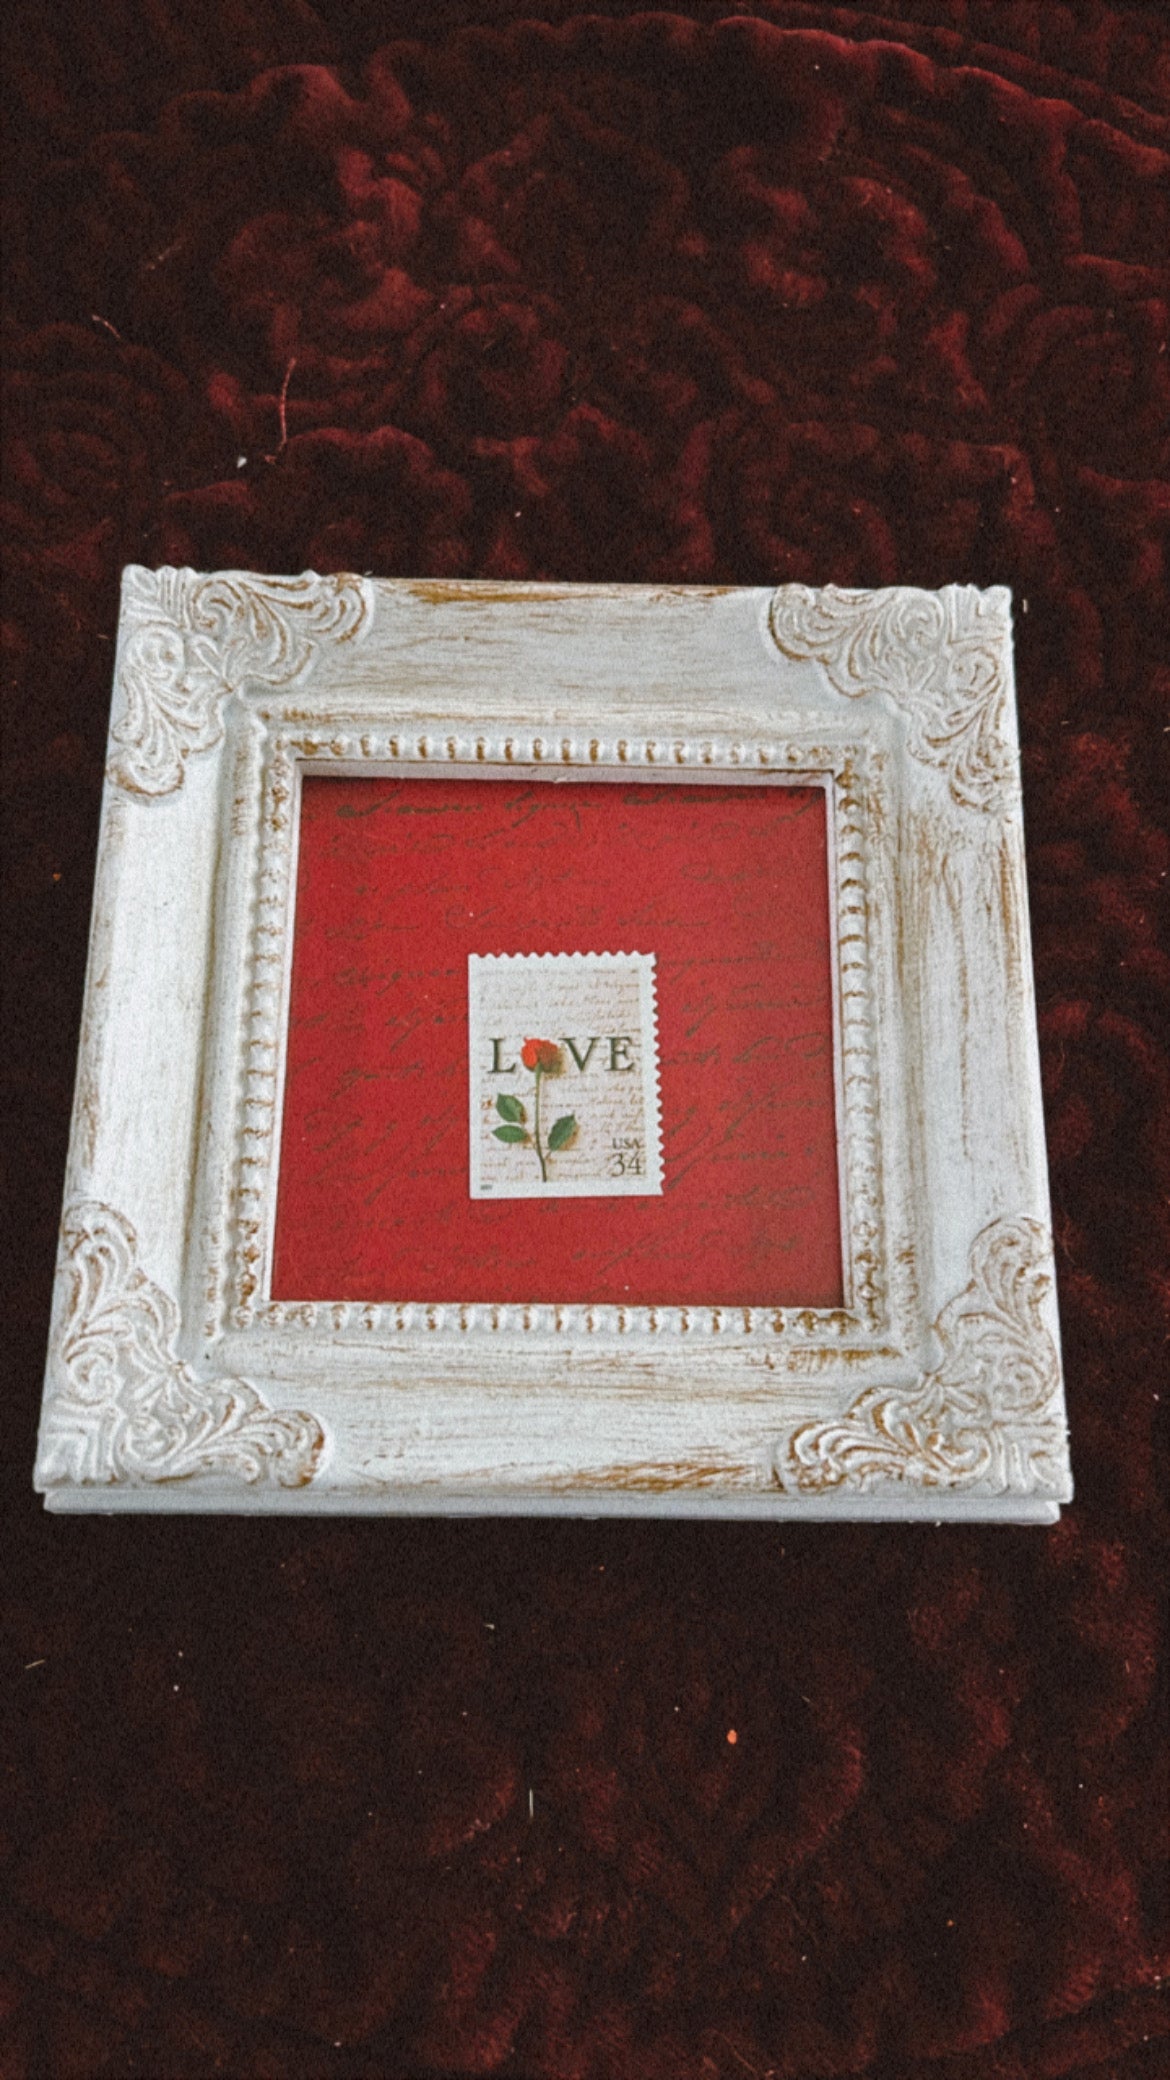 READY TO SHIP - Postage Stamp Art Frames